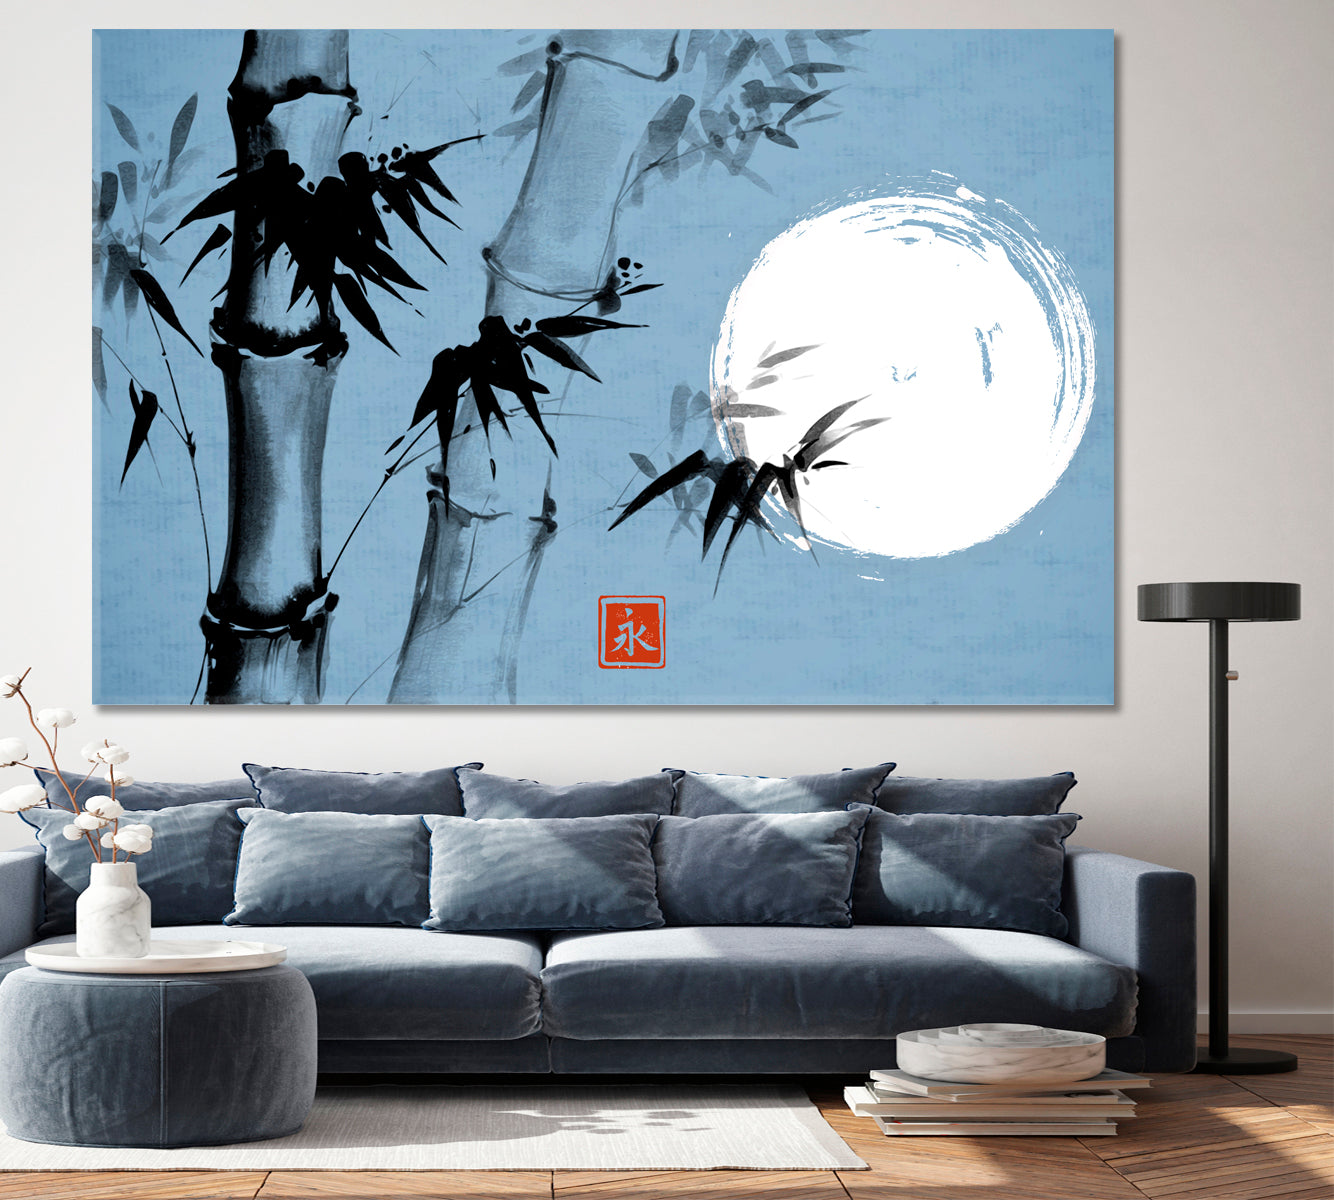 ZEN ETERNITY Bamboo Moon Traditional Japanese Sumi-e Ink Blue Asian Style Canvas Print Wall Art Artesty 1 panel 24" x 16" 